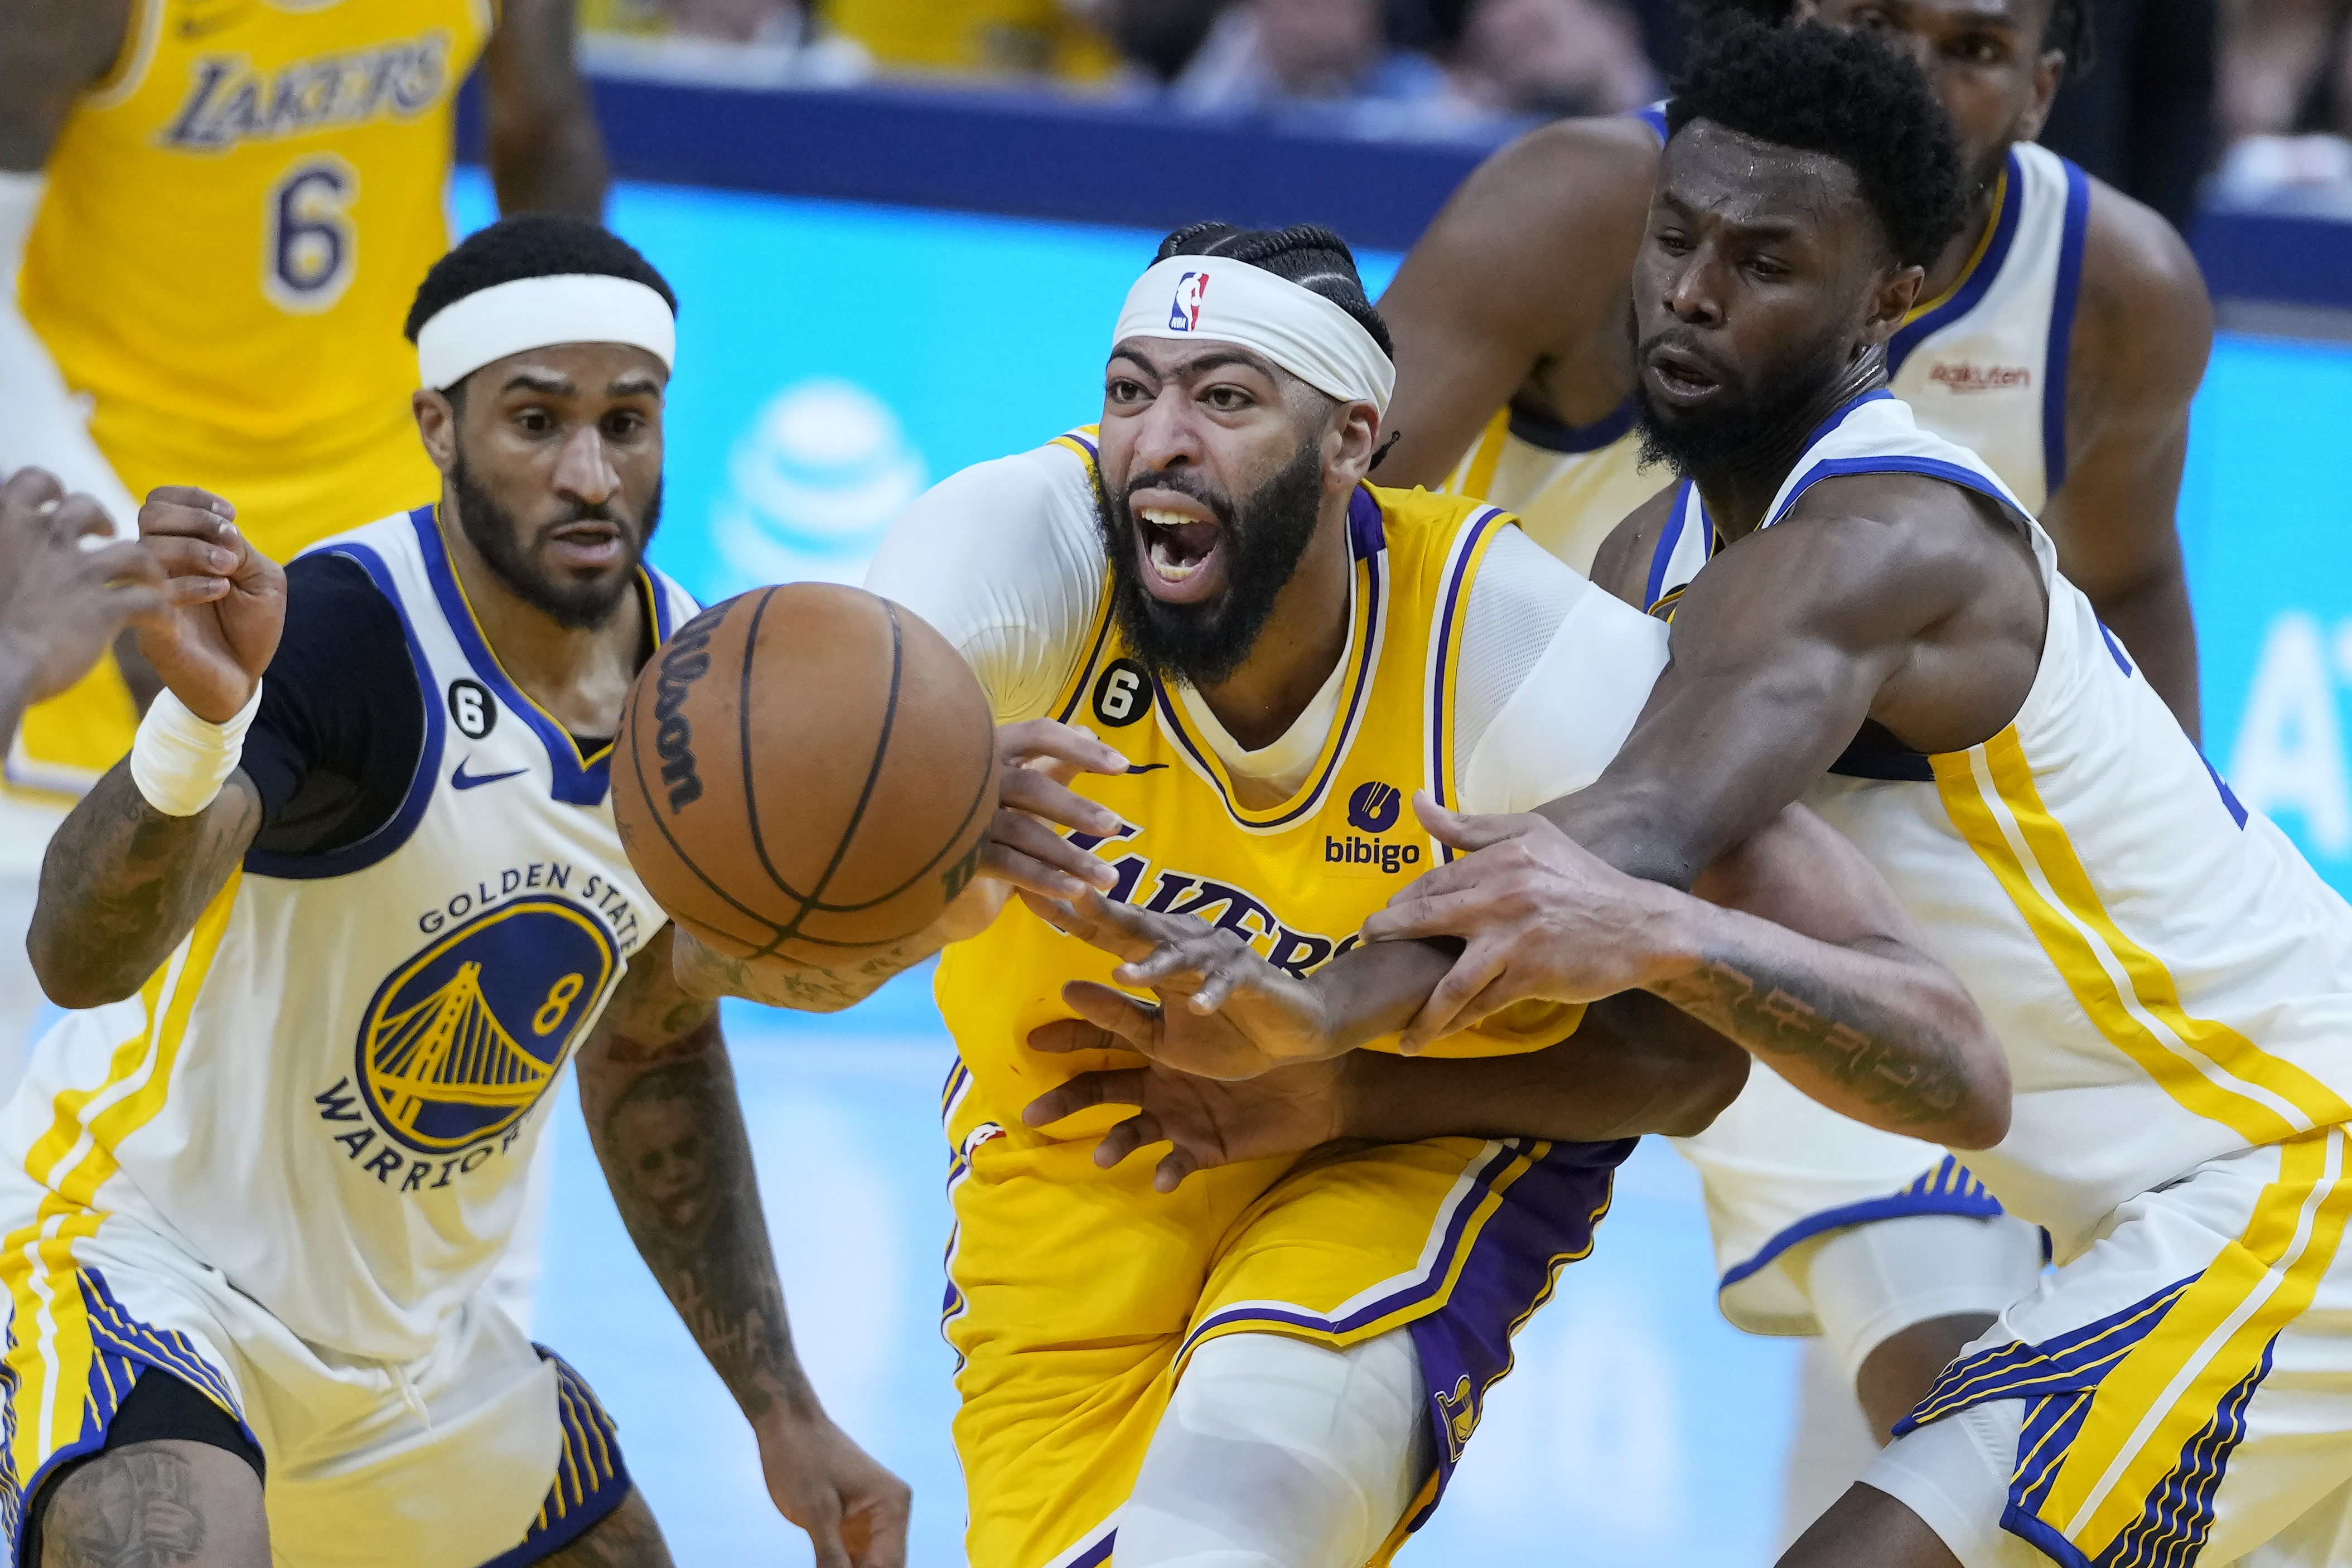 Los Angeles Lakers forward Anthony Davis, middle, reaches for the ball between Golden State Warriors guard Gary Payton II (8) and forward Andrew Wiggins during the first half of Game 5 of an NBA basketball second-round playoff series Wednesday, May 10, 2023, in San Francisco. (AP Photo/Godofredo A. Vásquez)